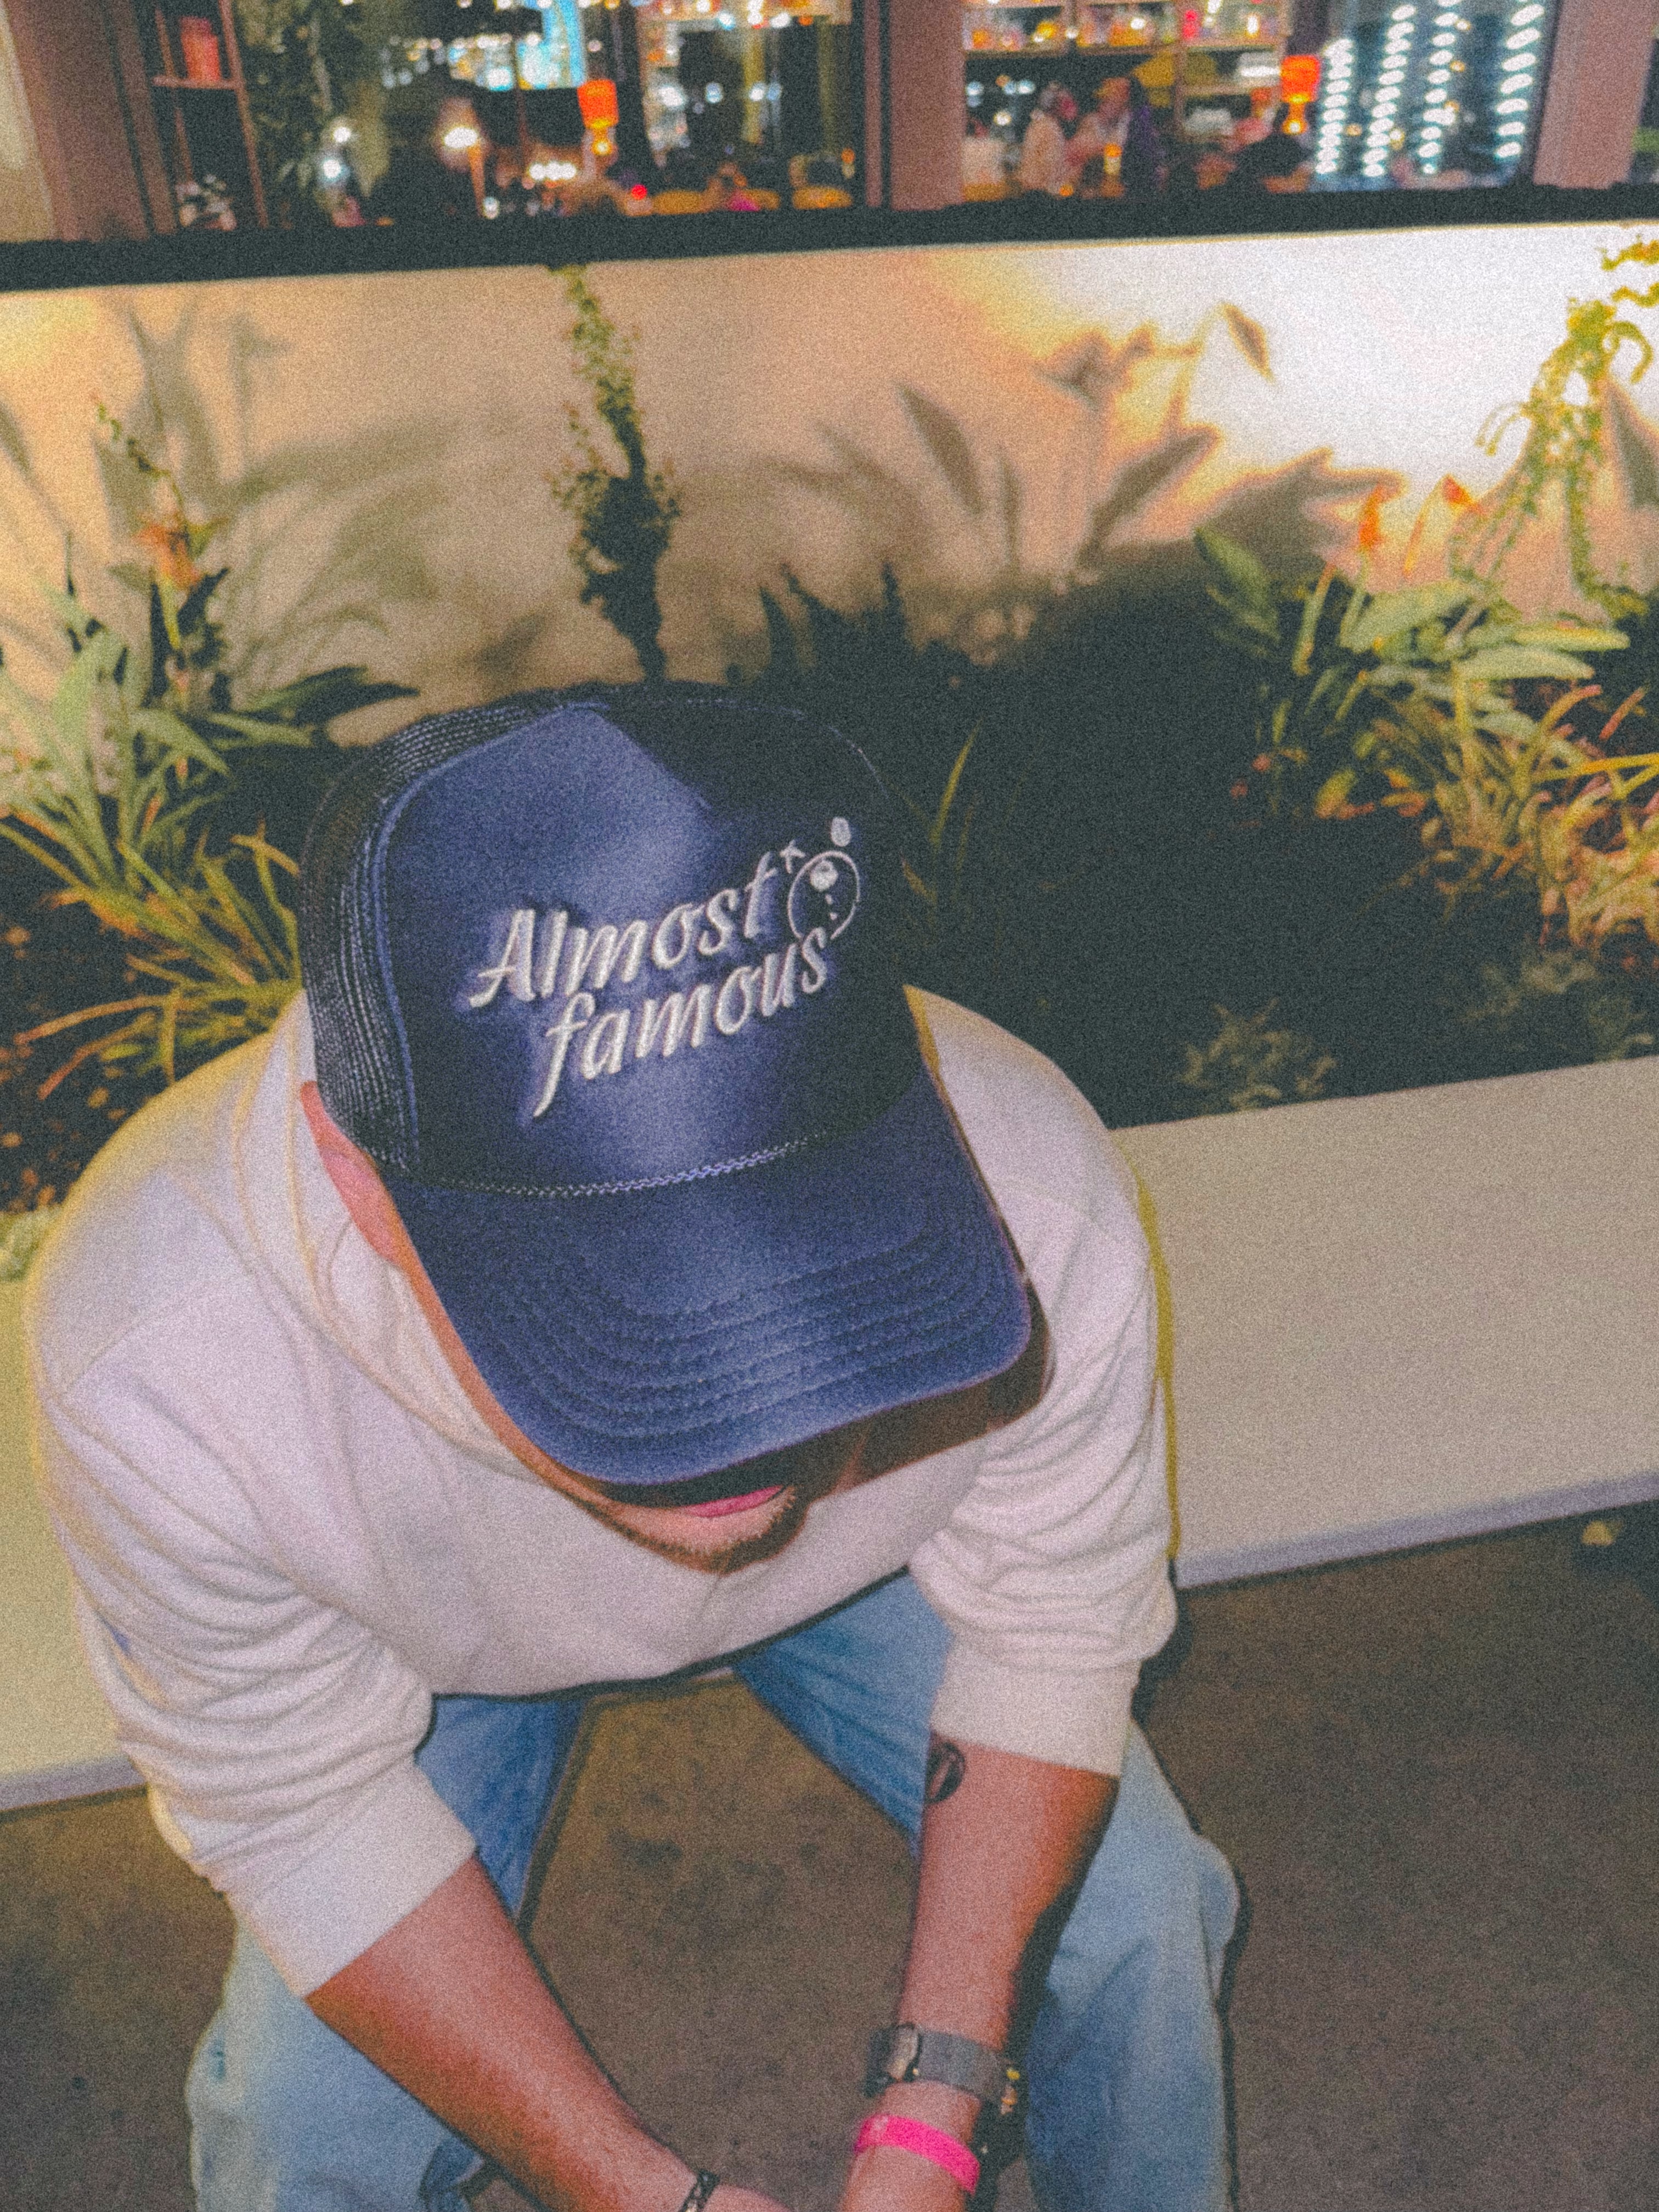 A person wearing an Almost Famous Trucker by Better not sits and looks down, surrounded by plants and city lights in the background.